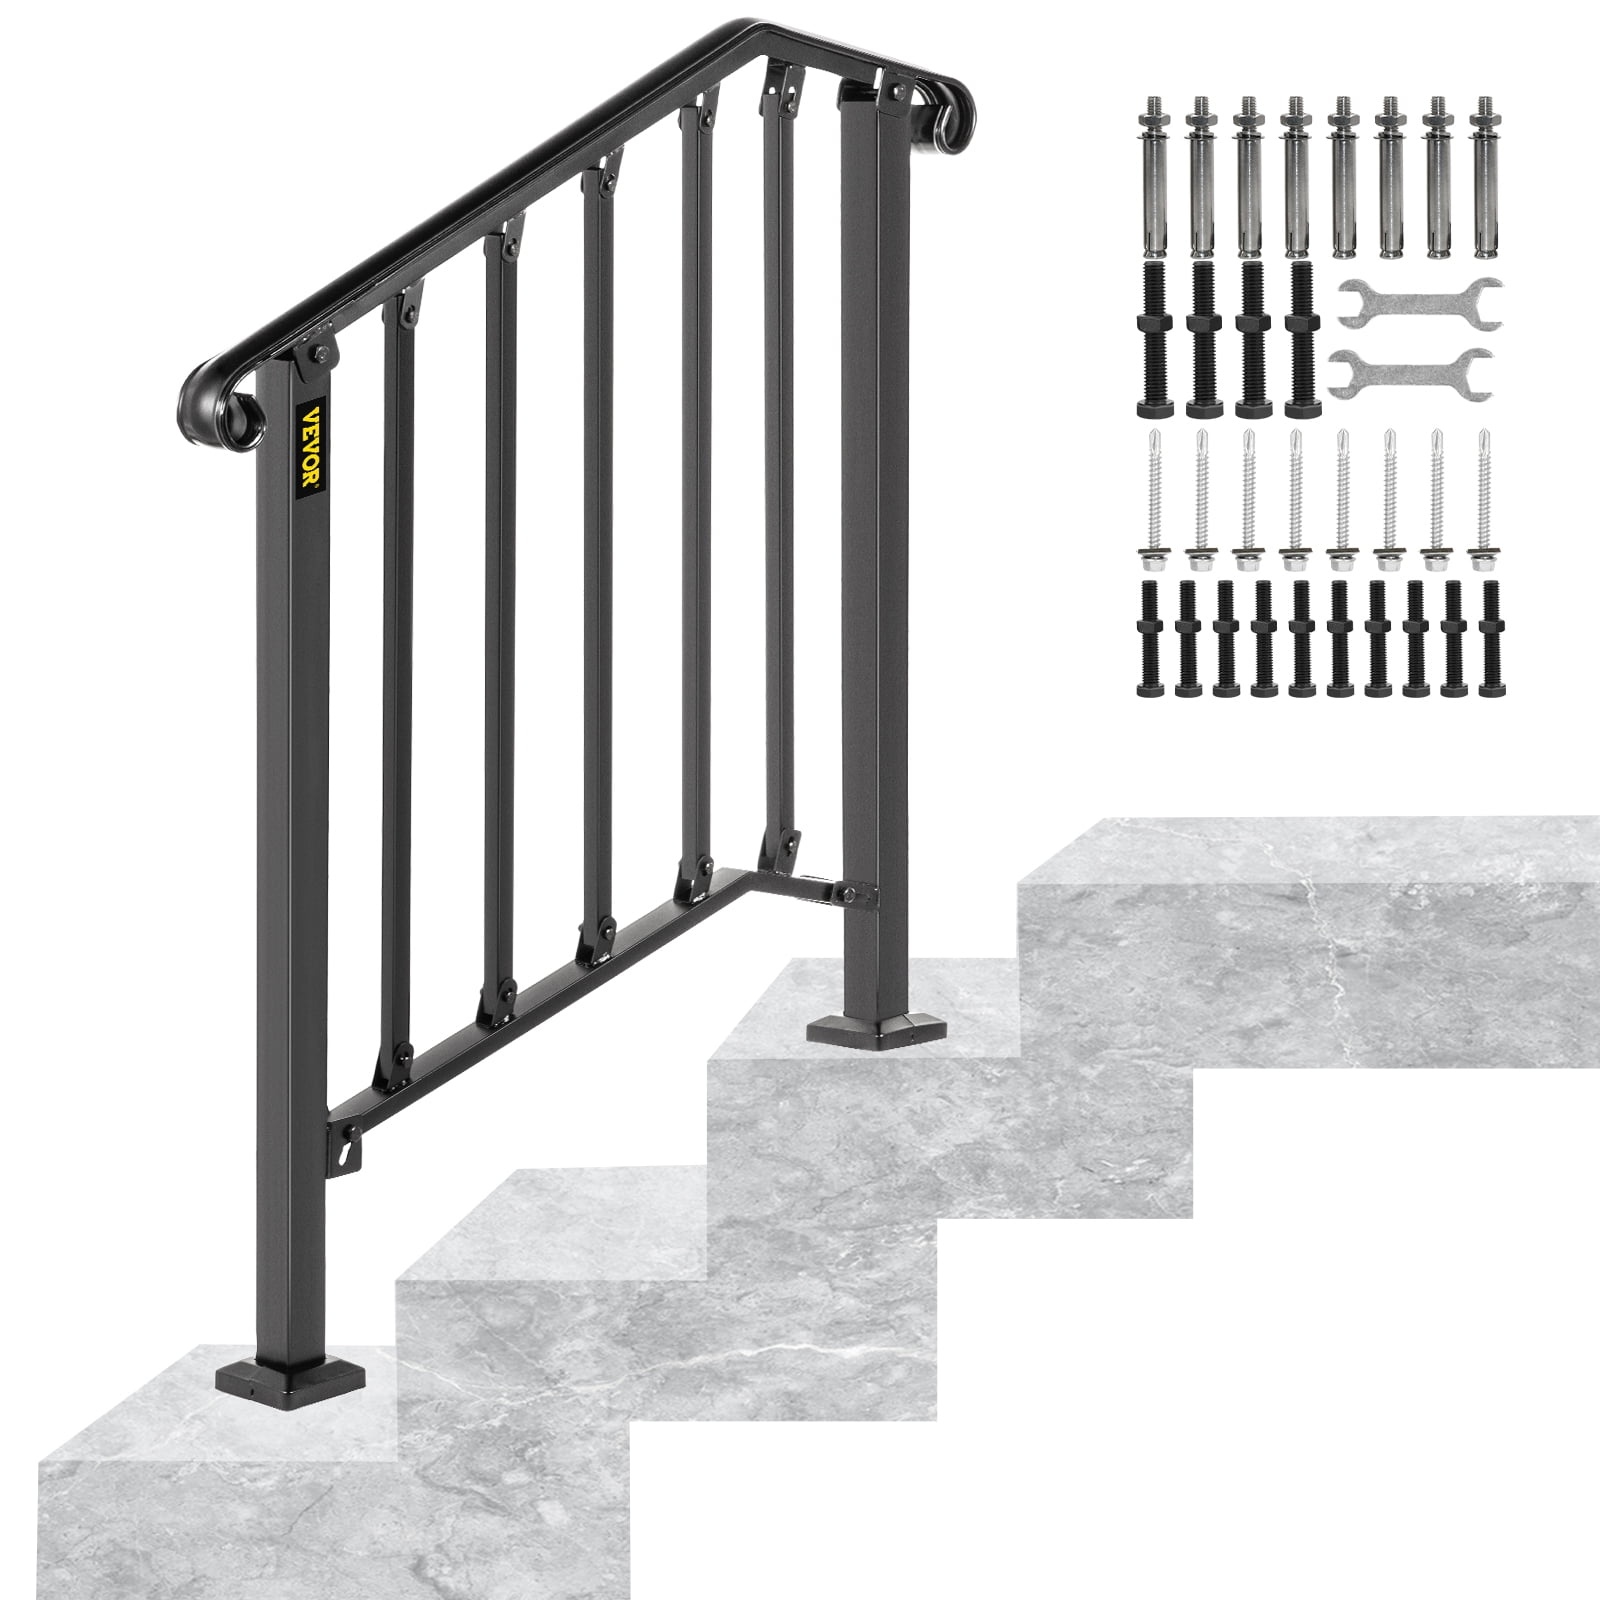 High Strength Wrought Iron Stair Railing Matt Black Powder Coat Handrail -Complete Kit Brackets Included Used as Staircase Hand Rails/Door Handle/Guardrail/Grab Bar 5 Colors 